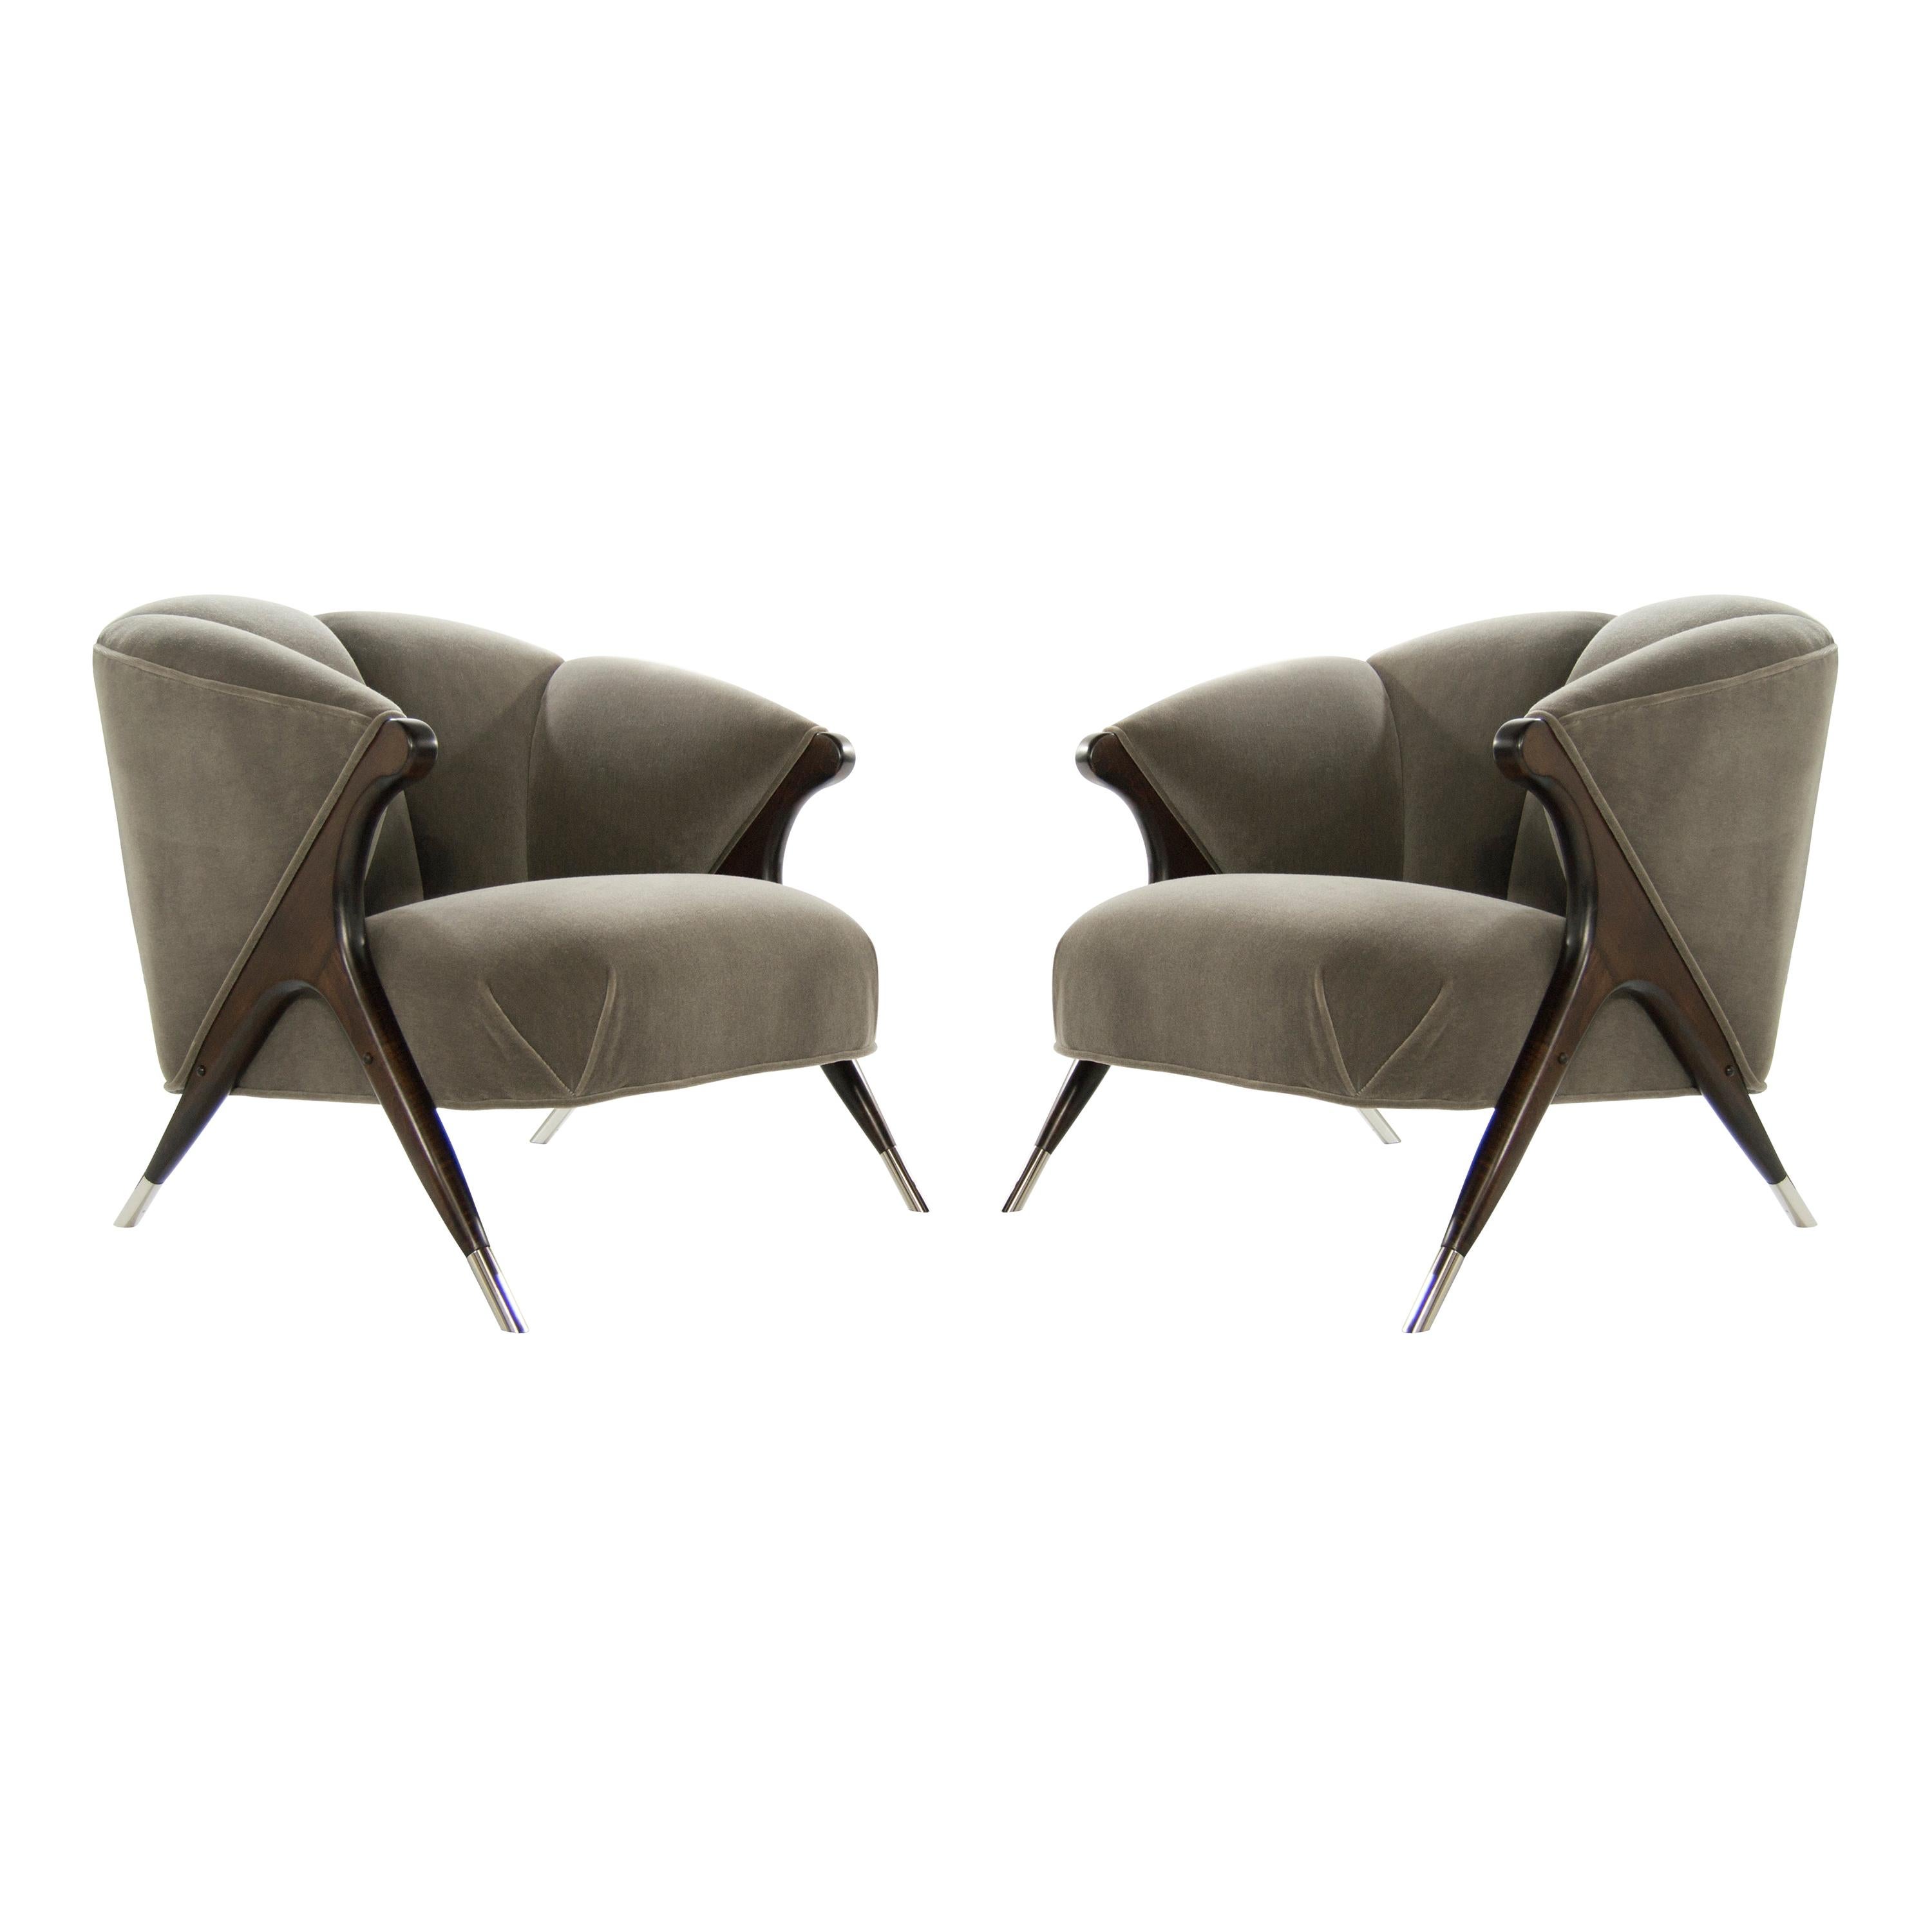 Modernist Karpen Lounge Chairs in Charcoal Mohair, 1950s